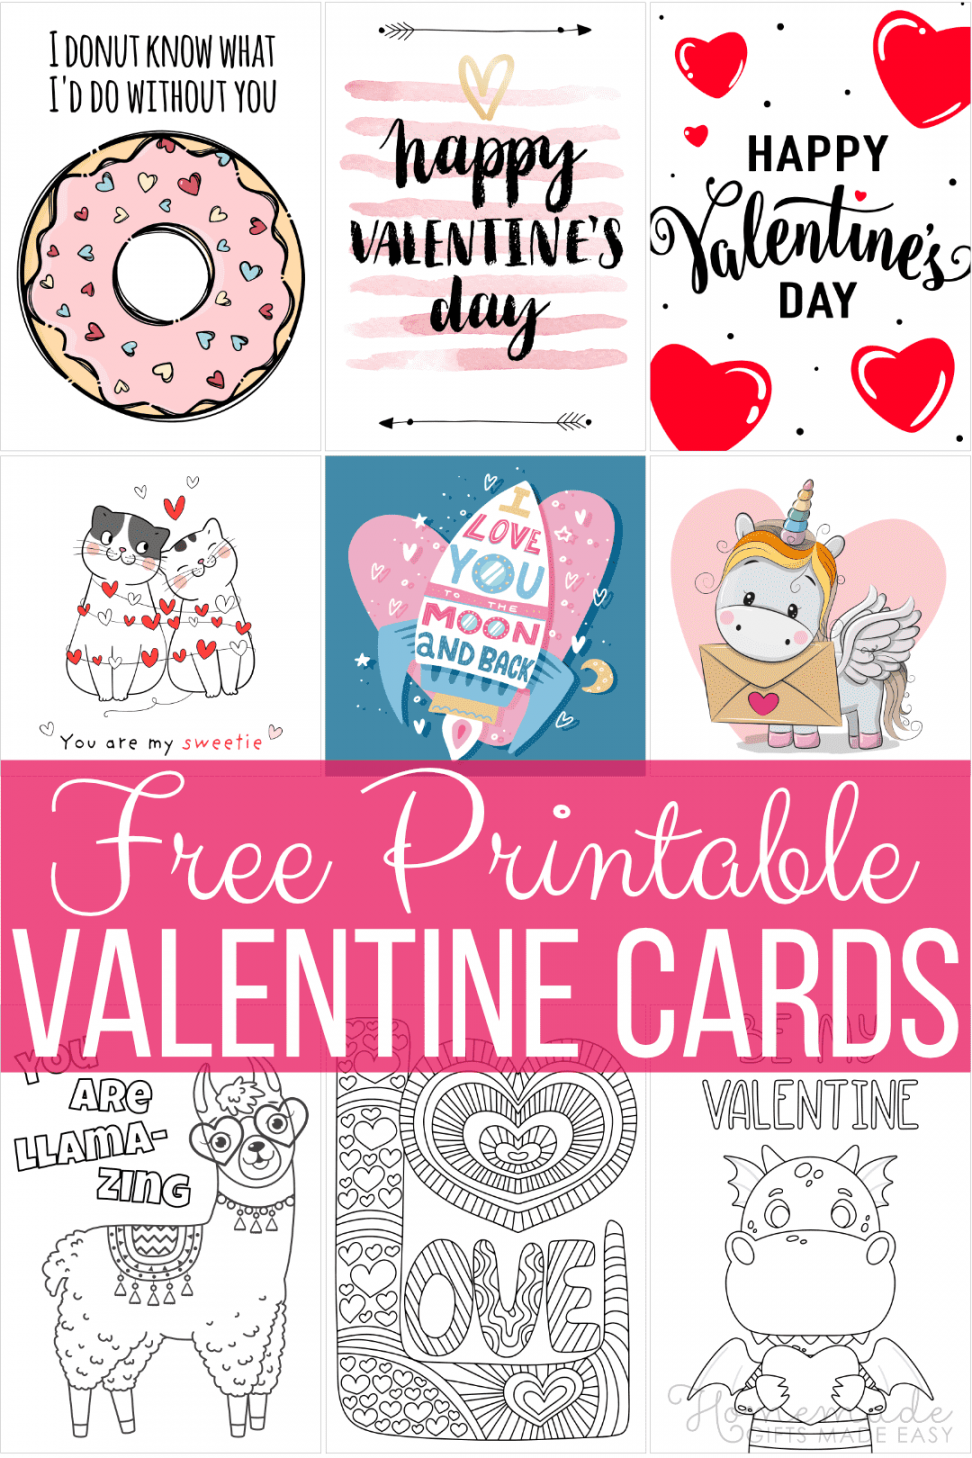 Free Printable Valentine Cards for